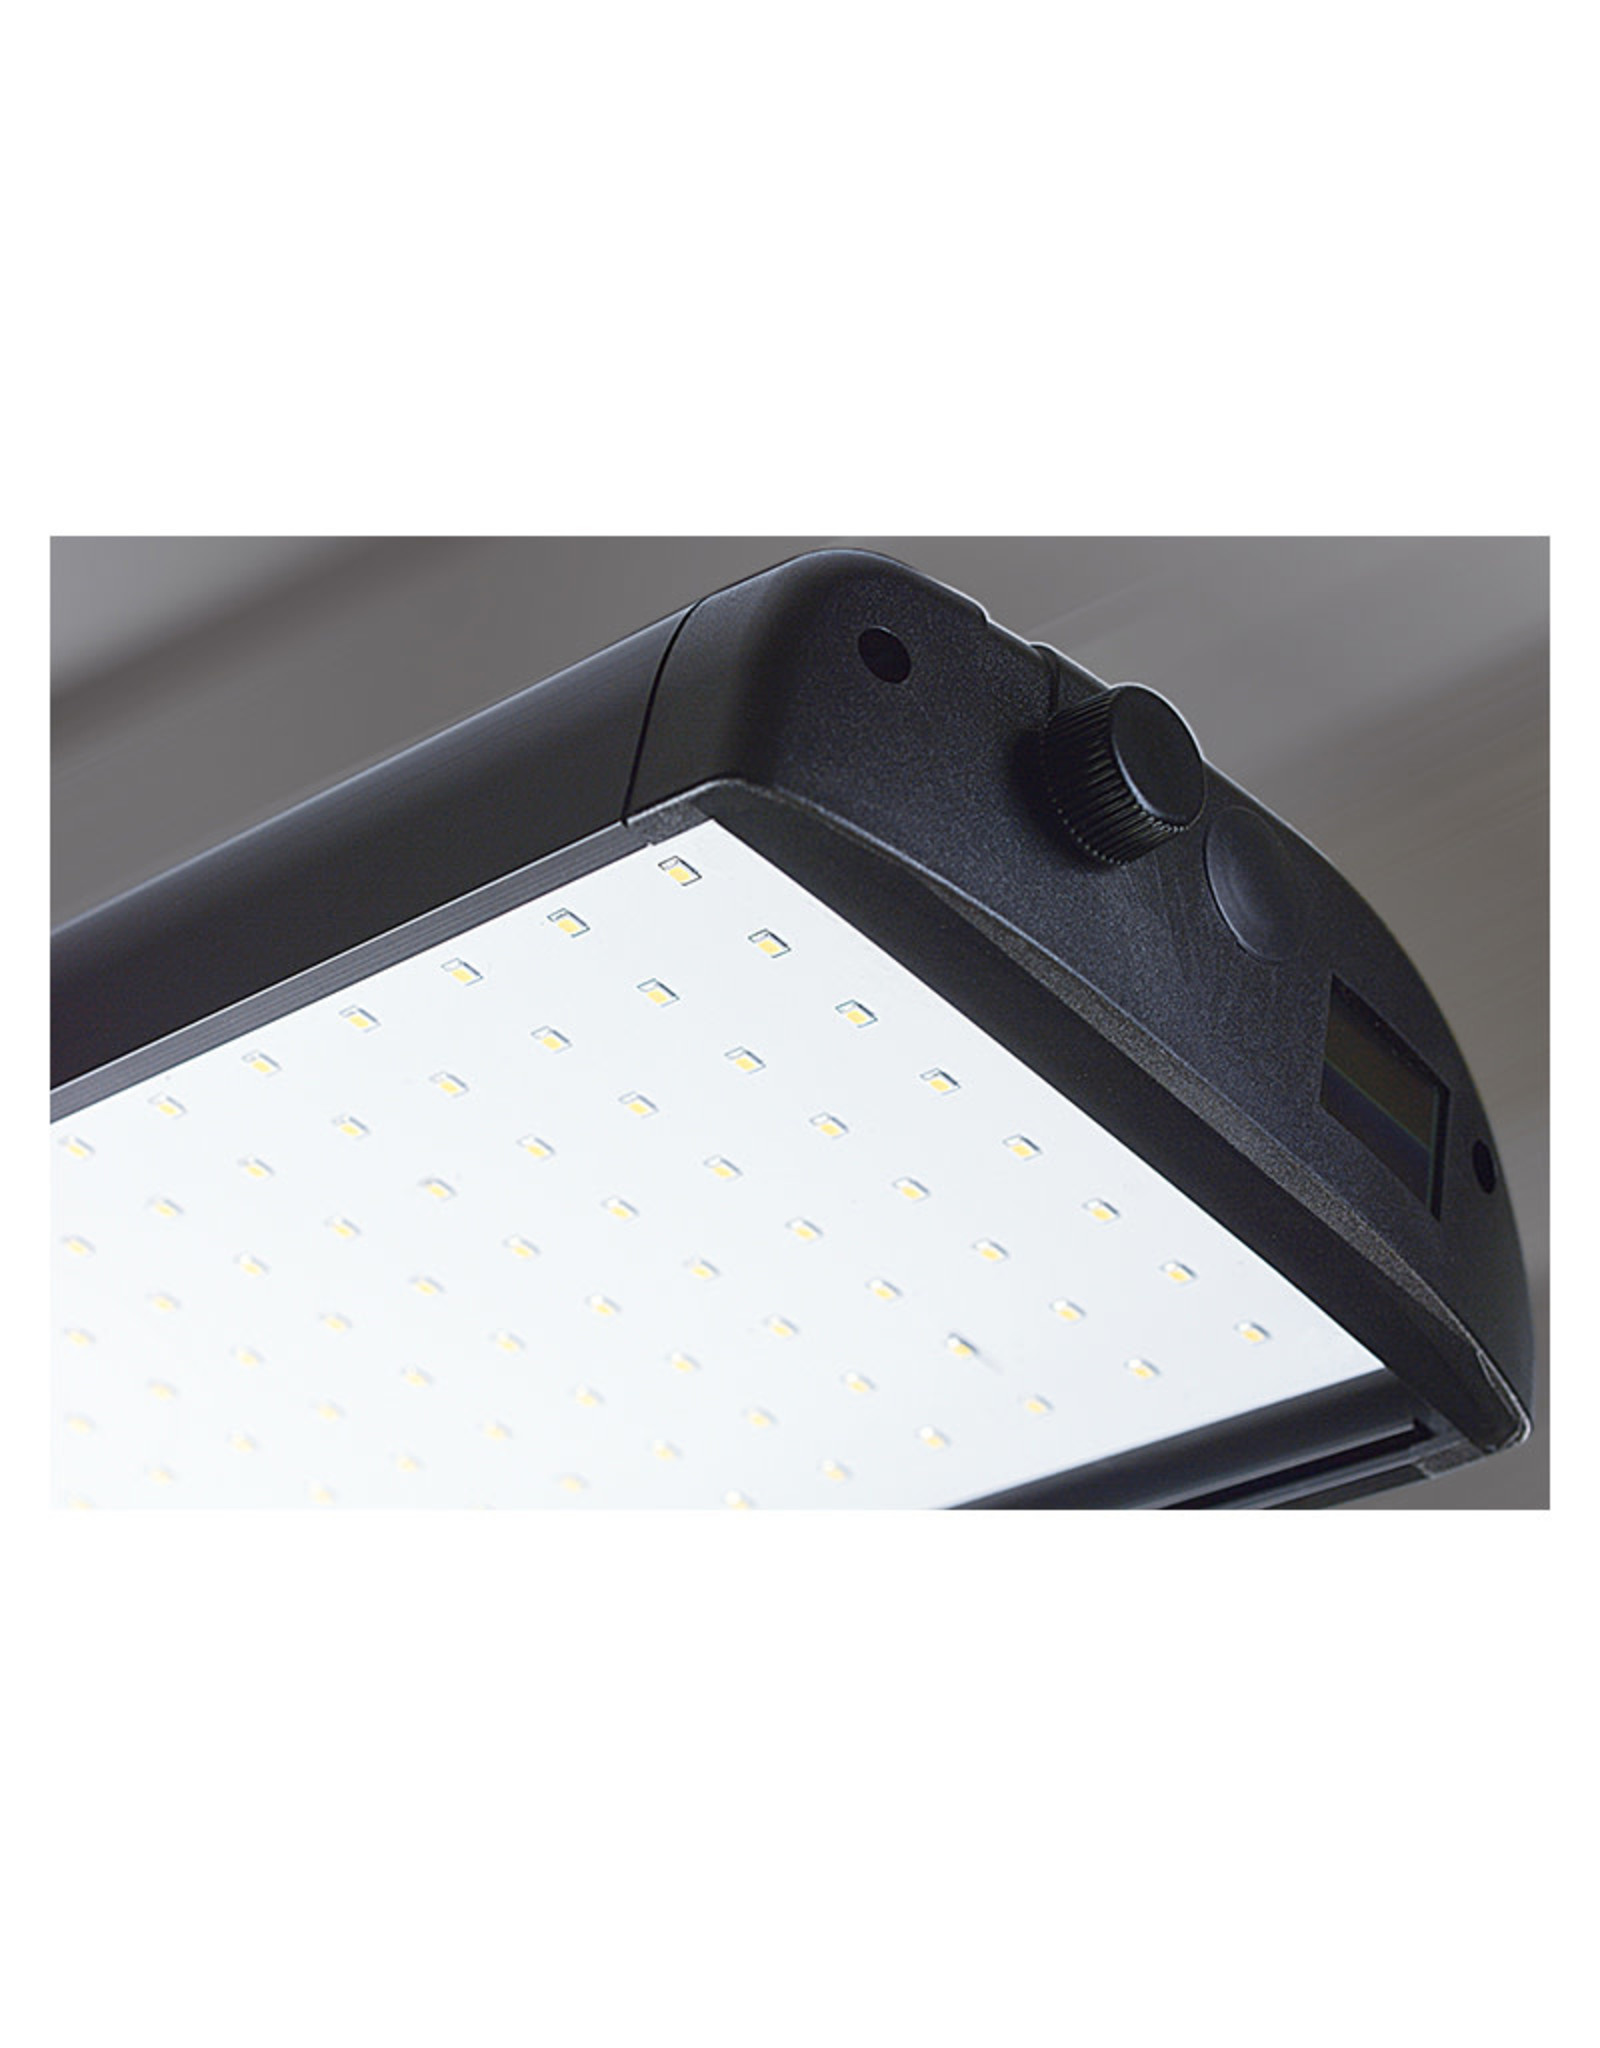 Kaiser Kaiser RB 560 AL LED Lighting Unit, with 2x 272 SMD-LEDs, 5600 K, CRI=95, for R1 and RD system copy stands